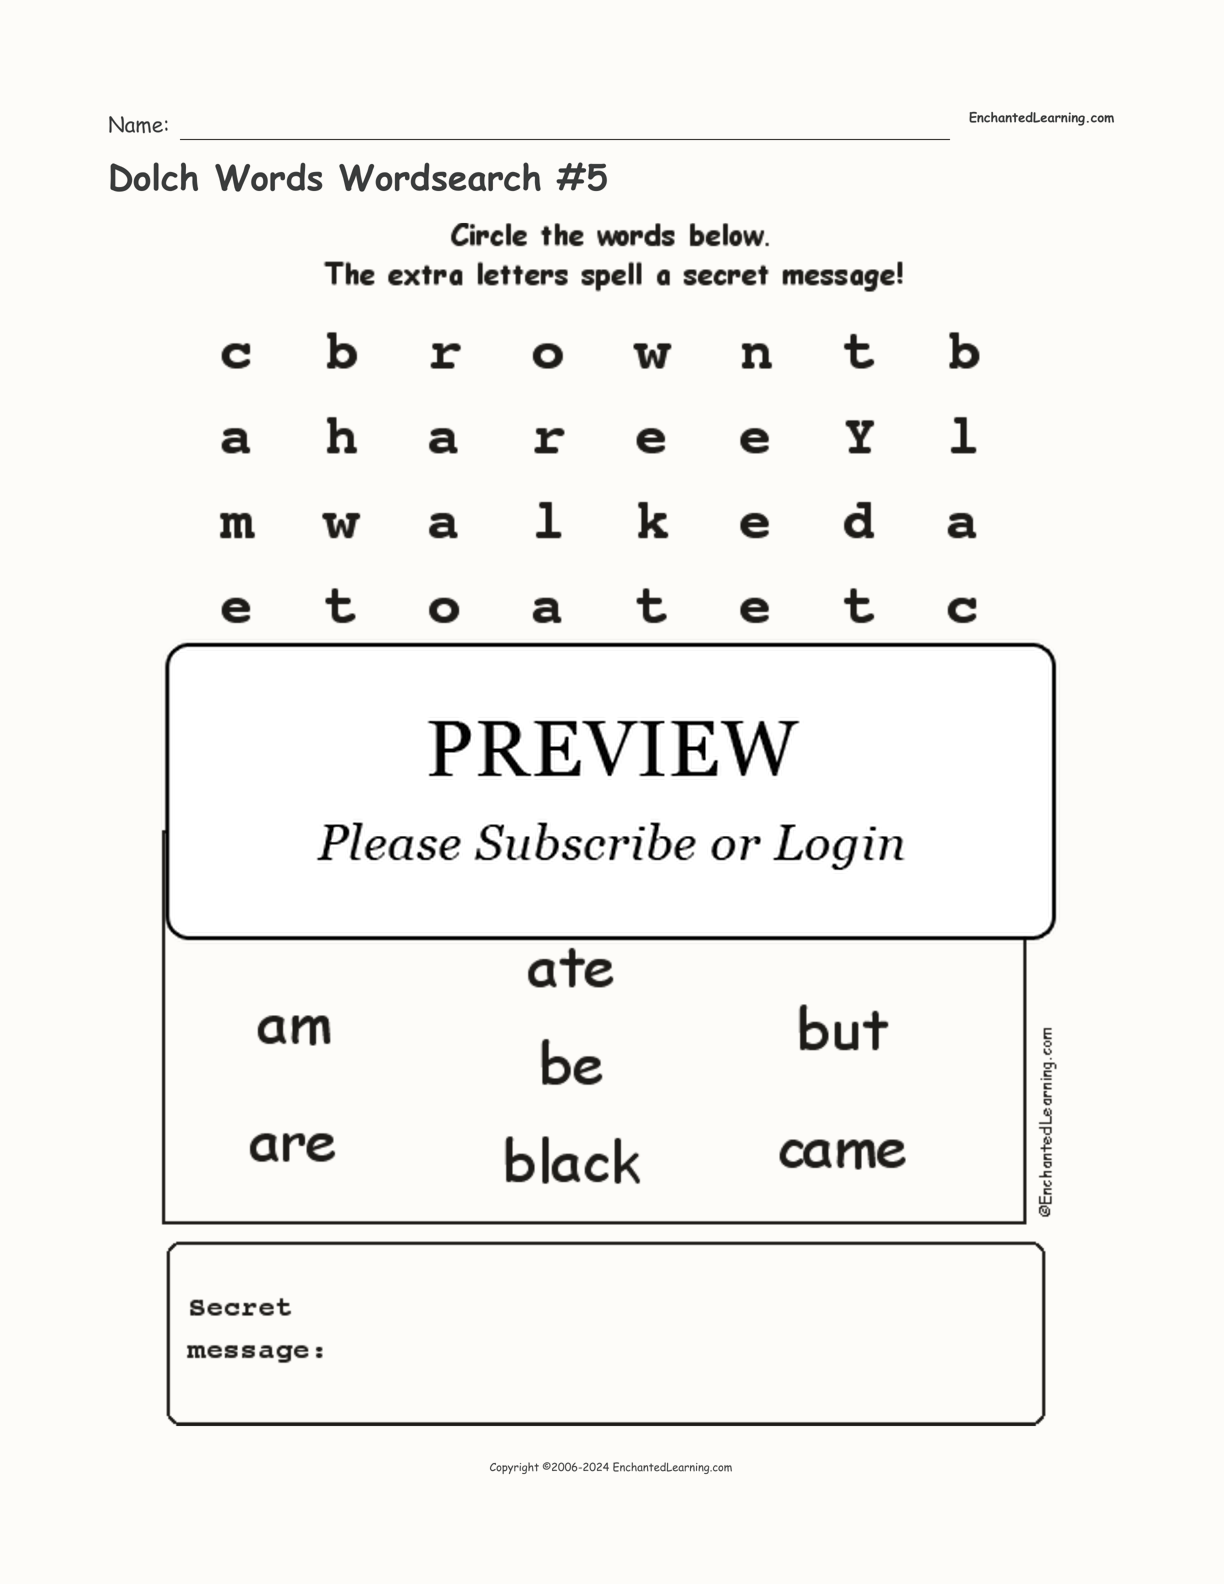 Dolch Words Wordsearch #5 interactive worksheet page 1